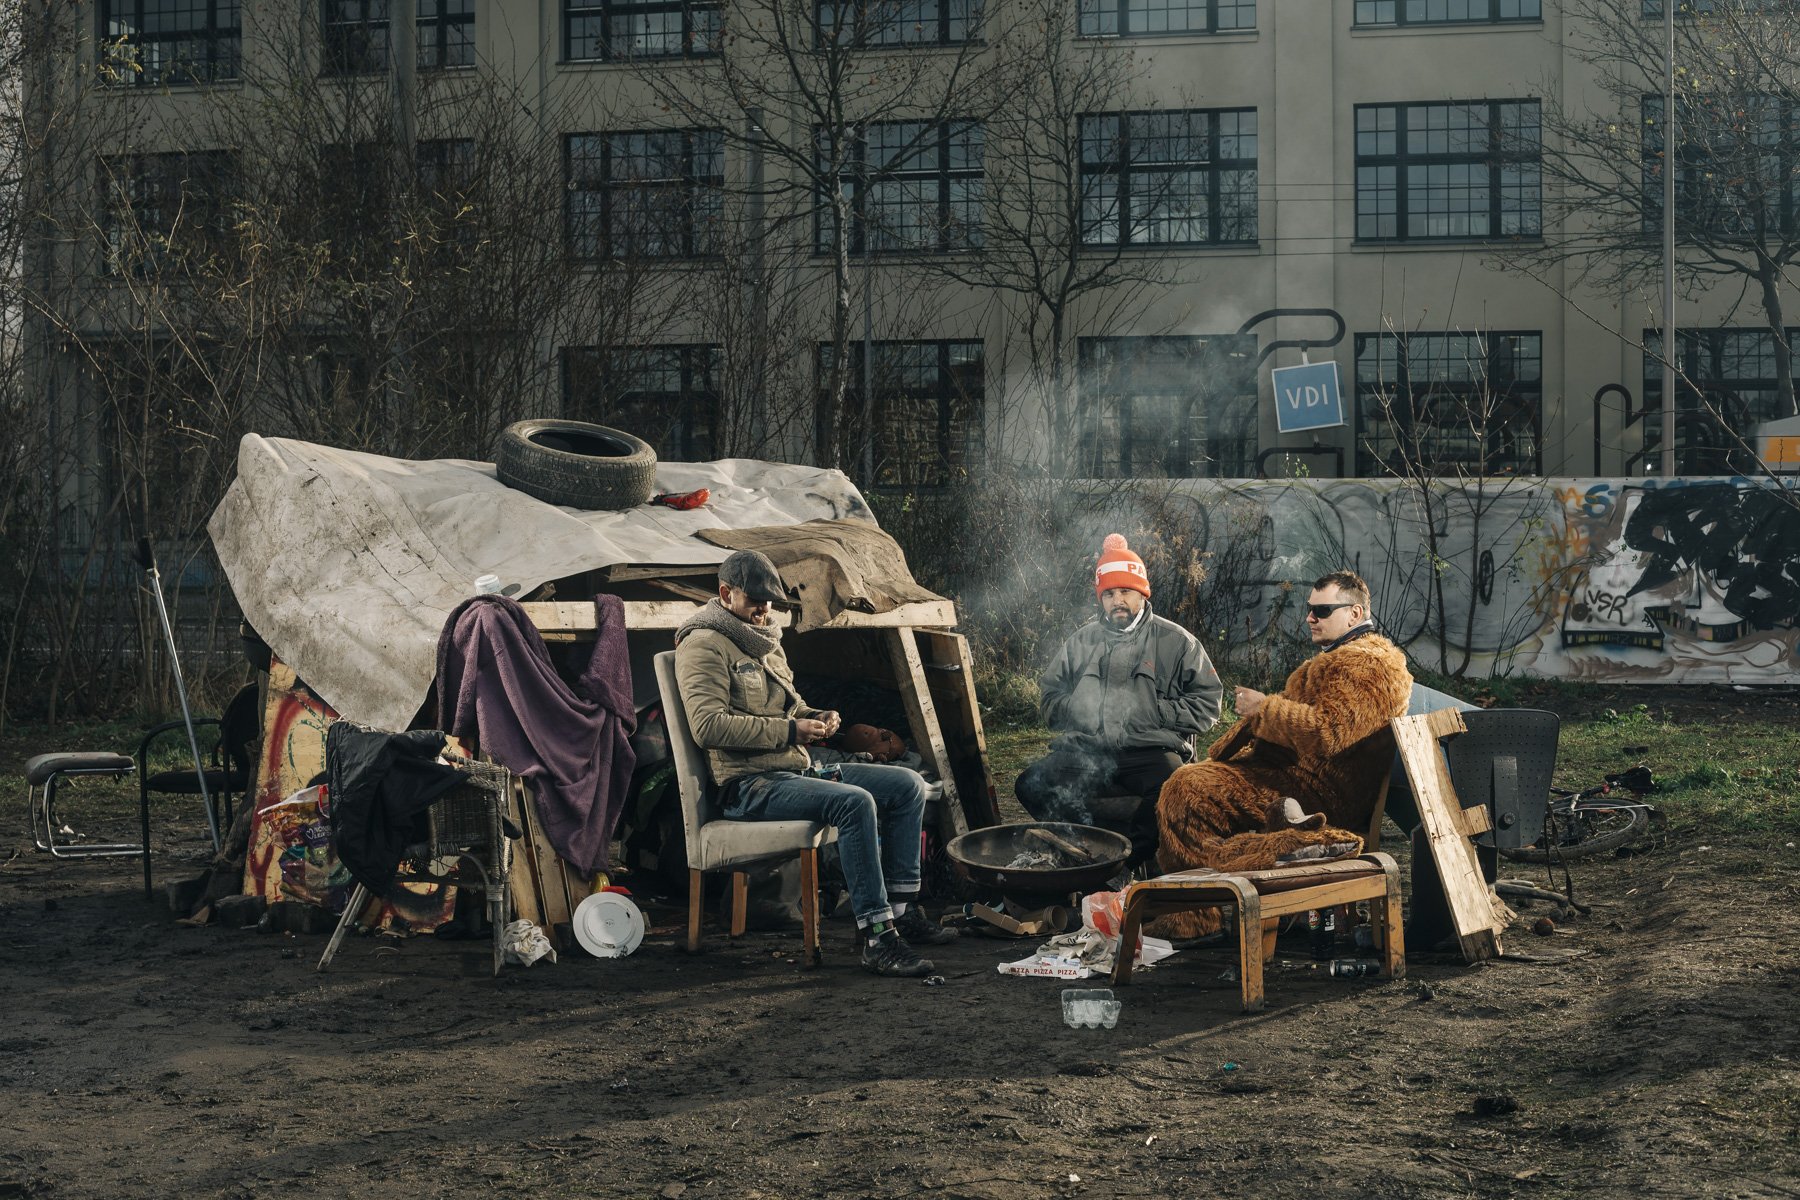  Nick, Michel, Silvio and Vladimir meet on a wasteland in Leipzig to spend time together. Since no big parties are allowed at the moment, they like to sit around their fire bowl and listen to mobile phone music. Nick does not know whether he has had 